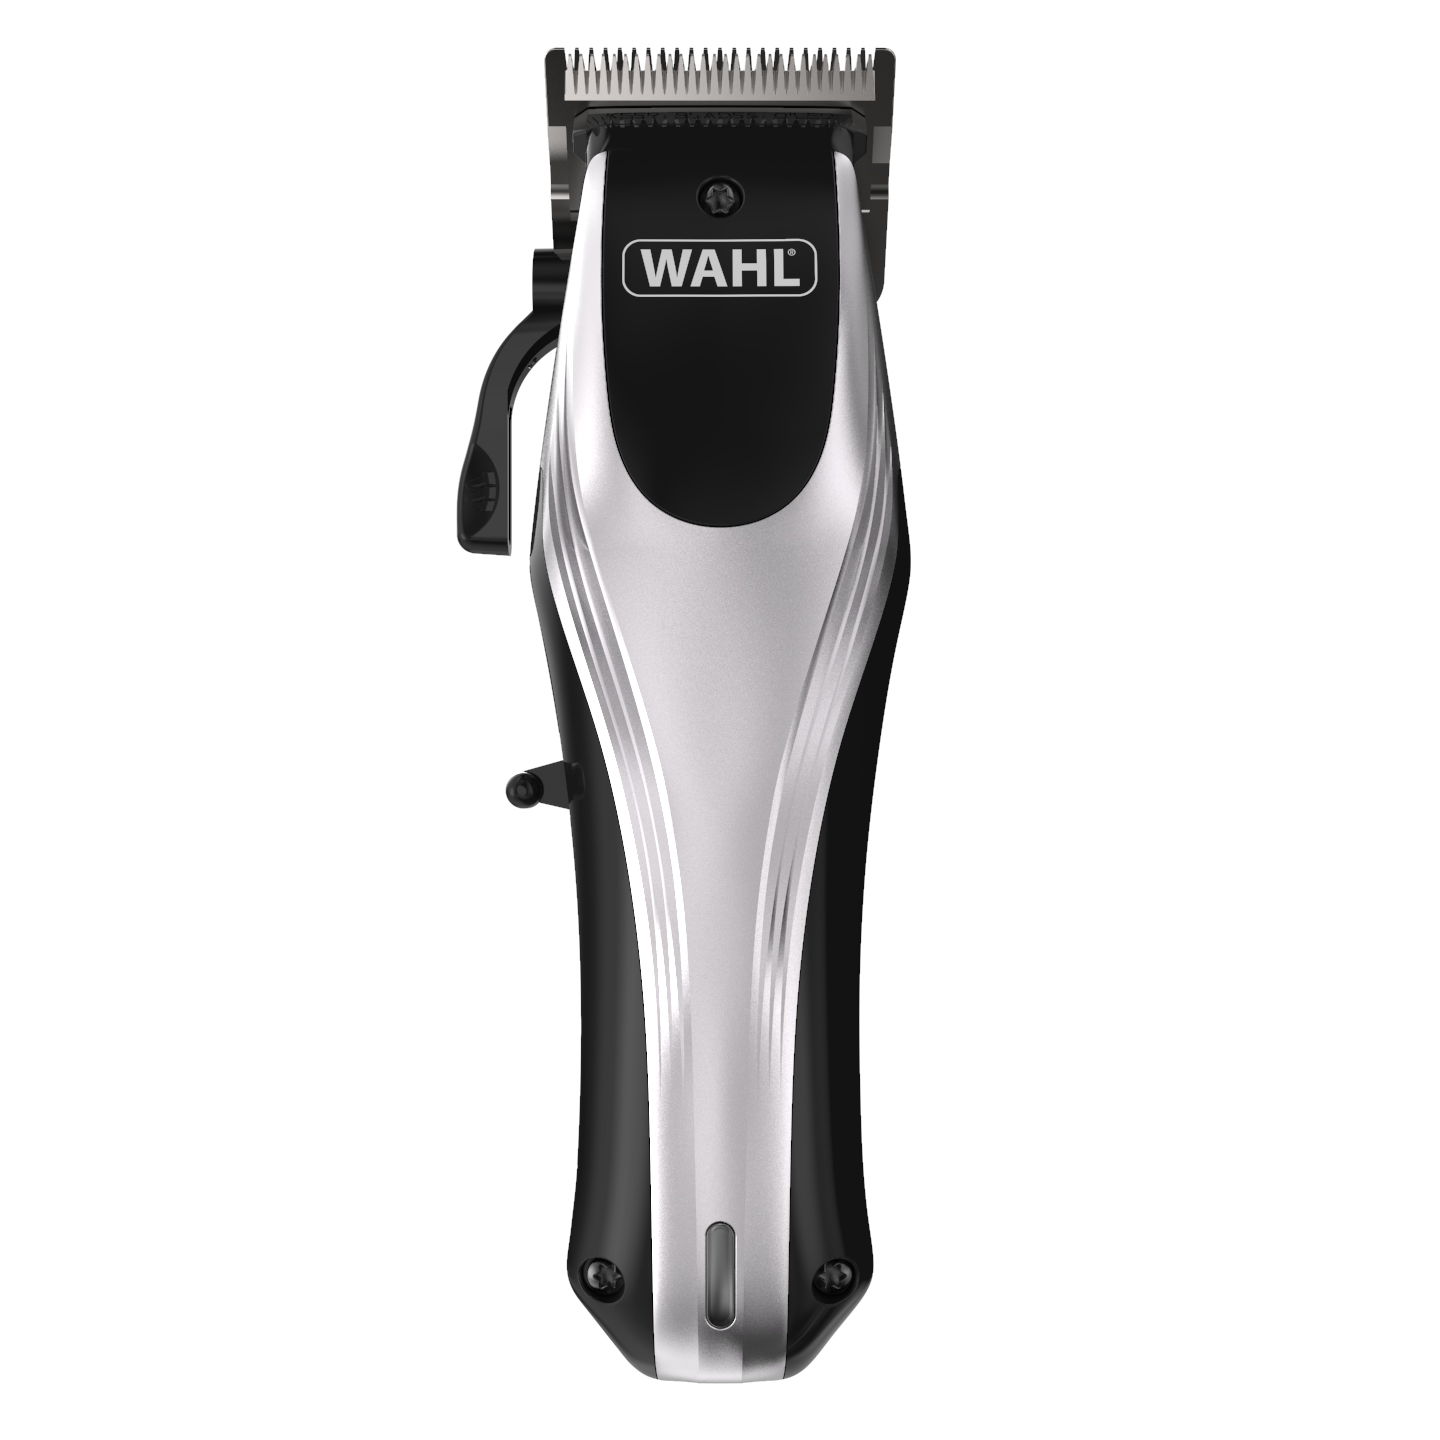 Professional Cordless Barber Hair Clippers – K5 International